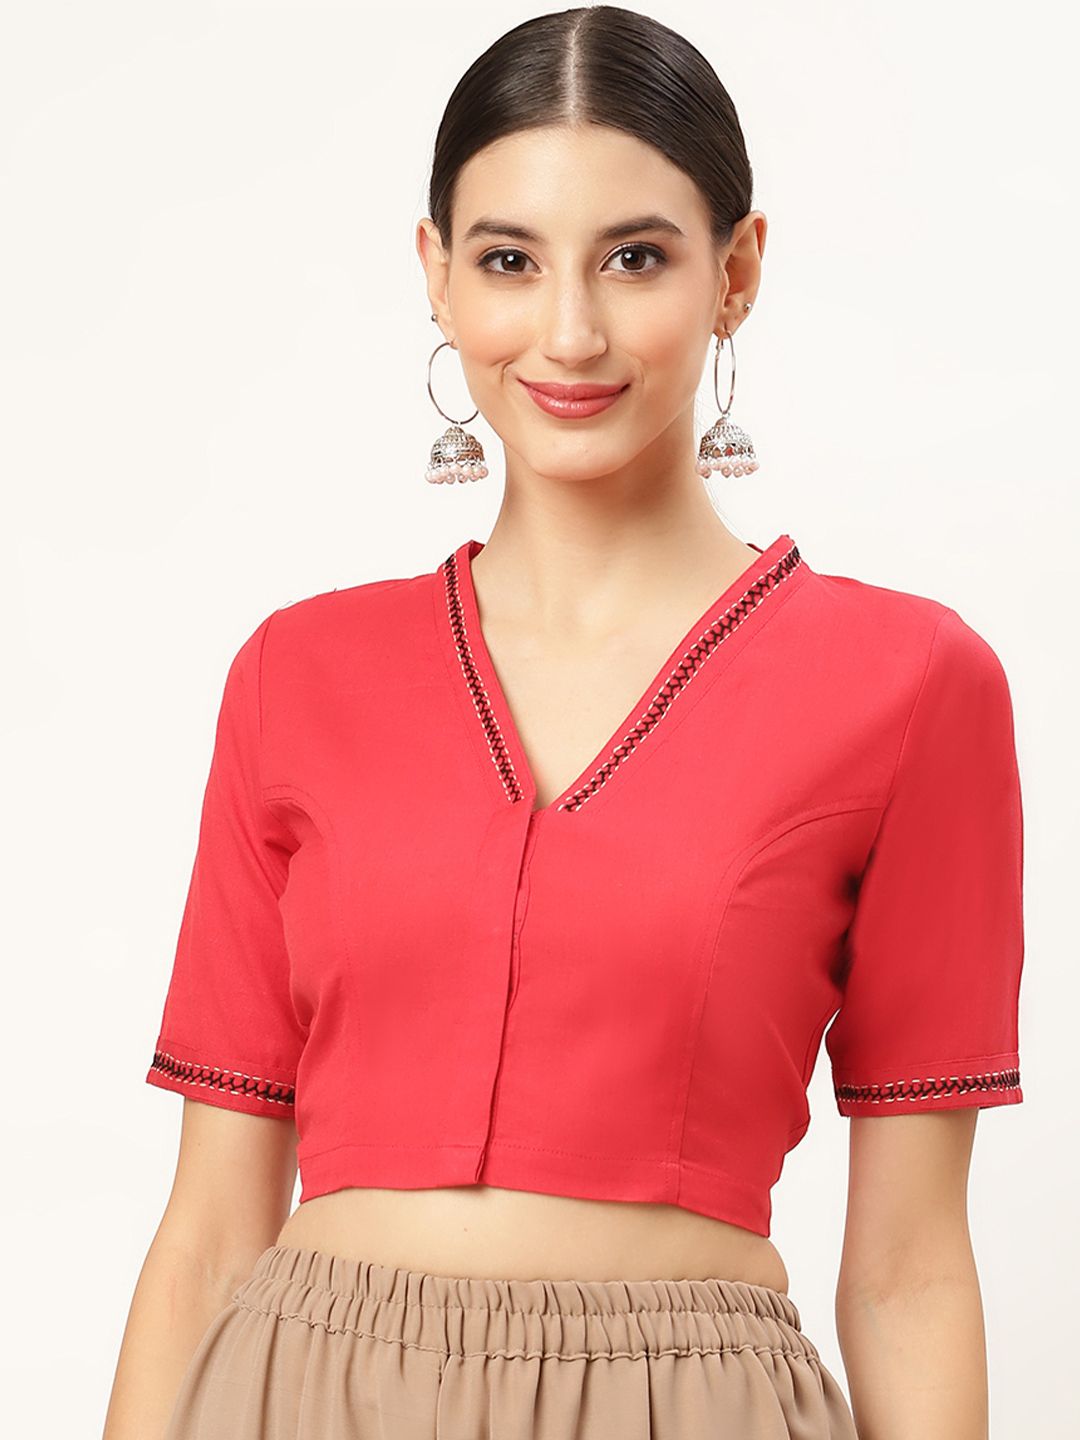 Molcha Women Red Solid Cotton Saree Blouse Price in India